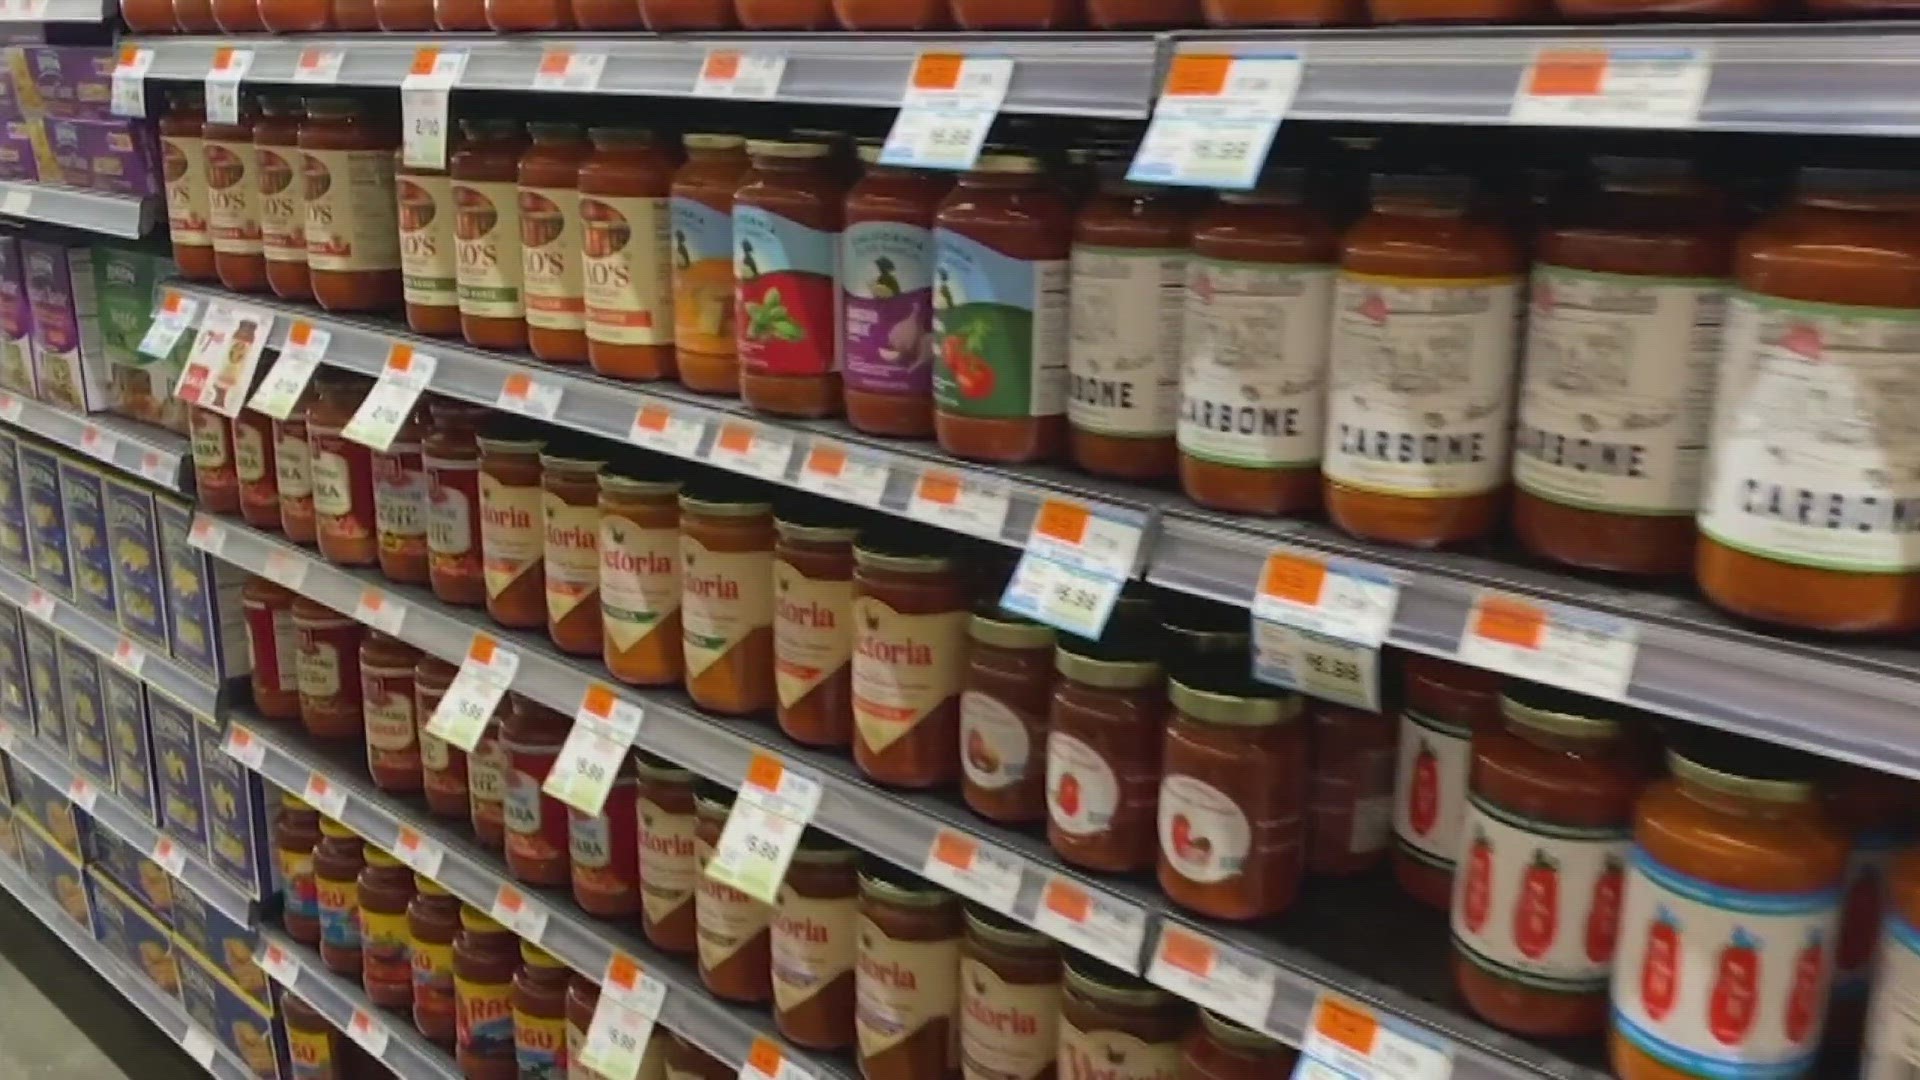 2WTK takes a closer look at what food labels really mean.